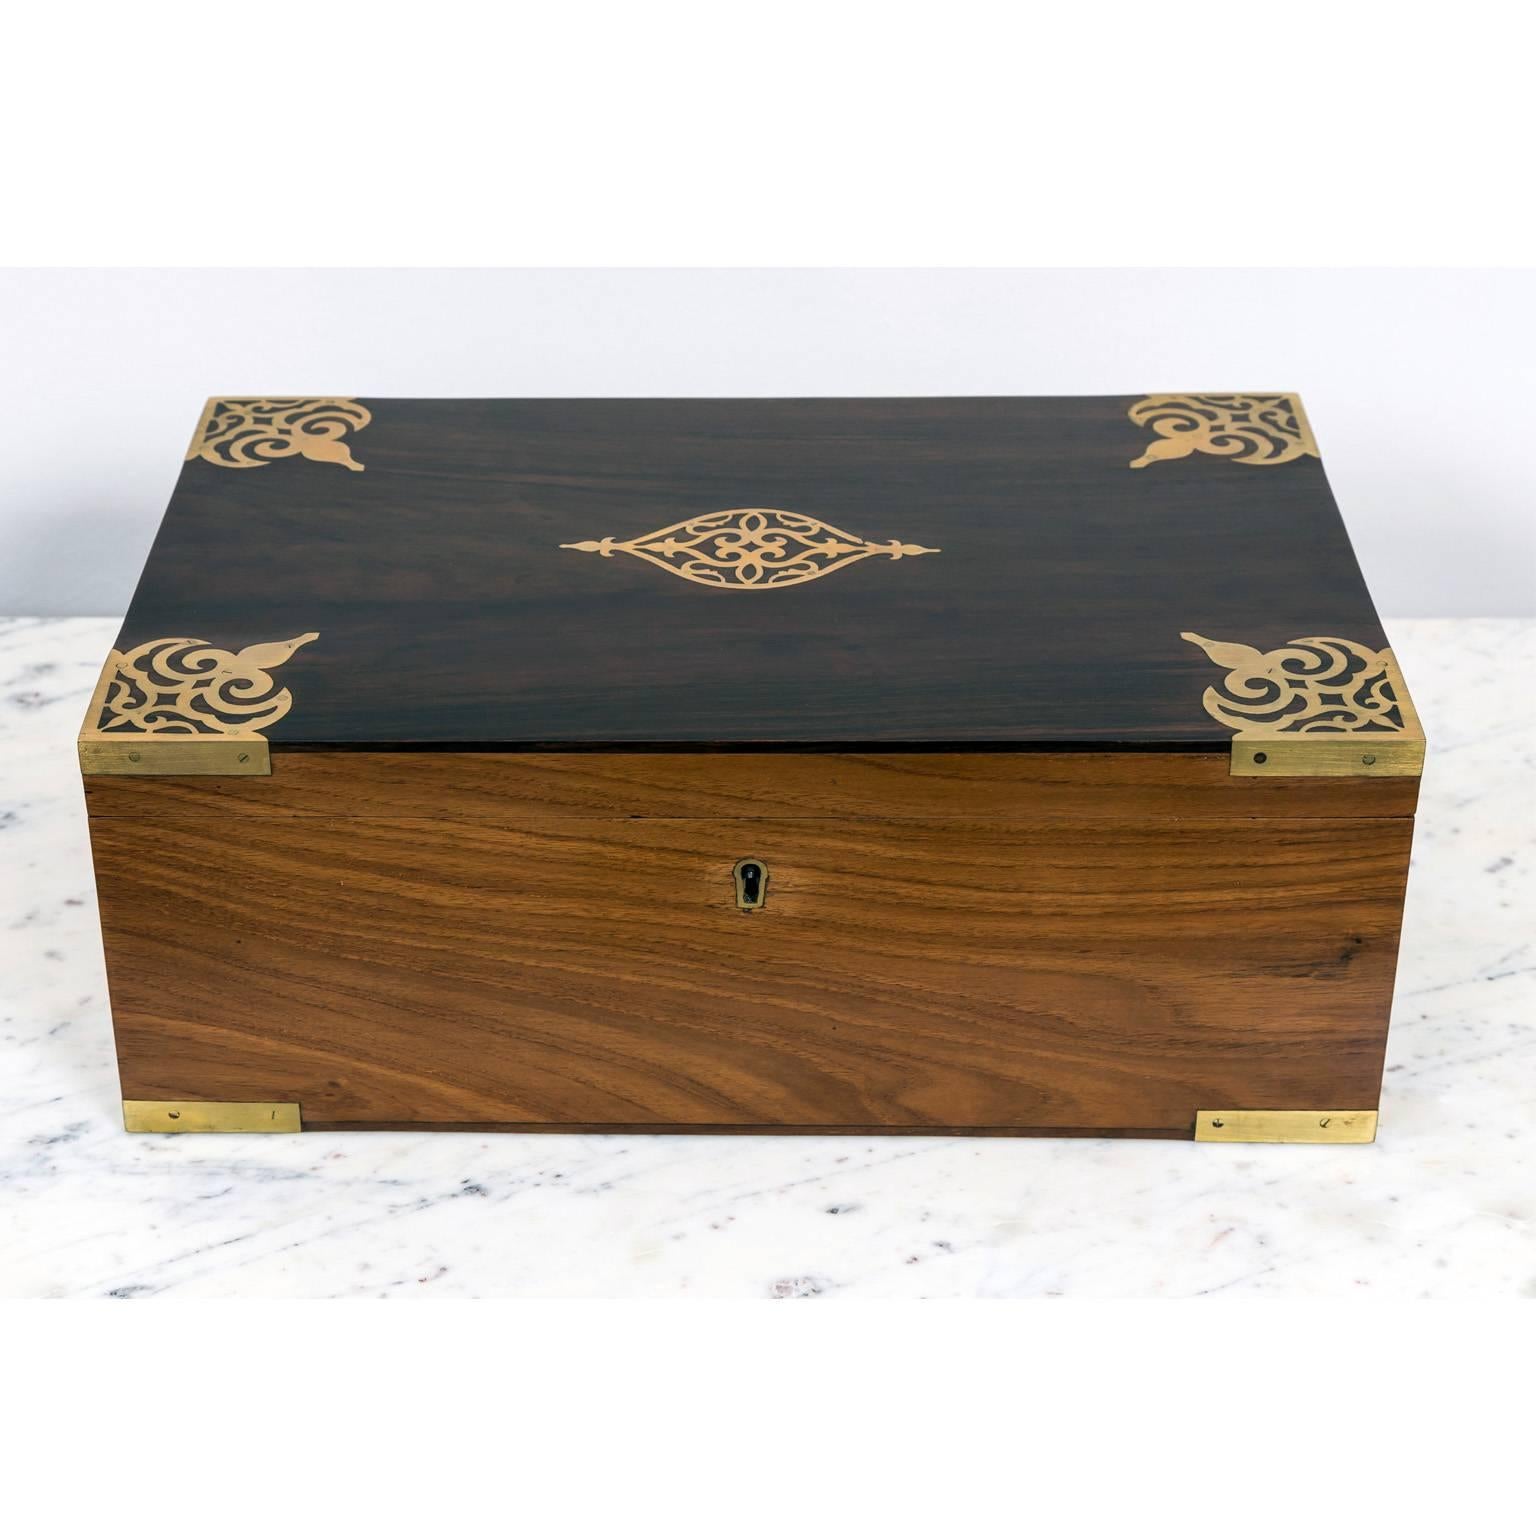 A beautiful British Colonial teakwood writing box with a brass lock, hinges and carrying handles. The lid of the box made of rosewood and decorated and reinforced with brass banding, corner mounts and a brass motif at center. 
The box opens to